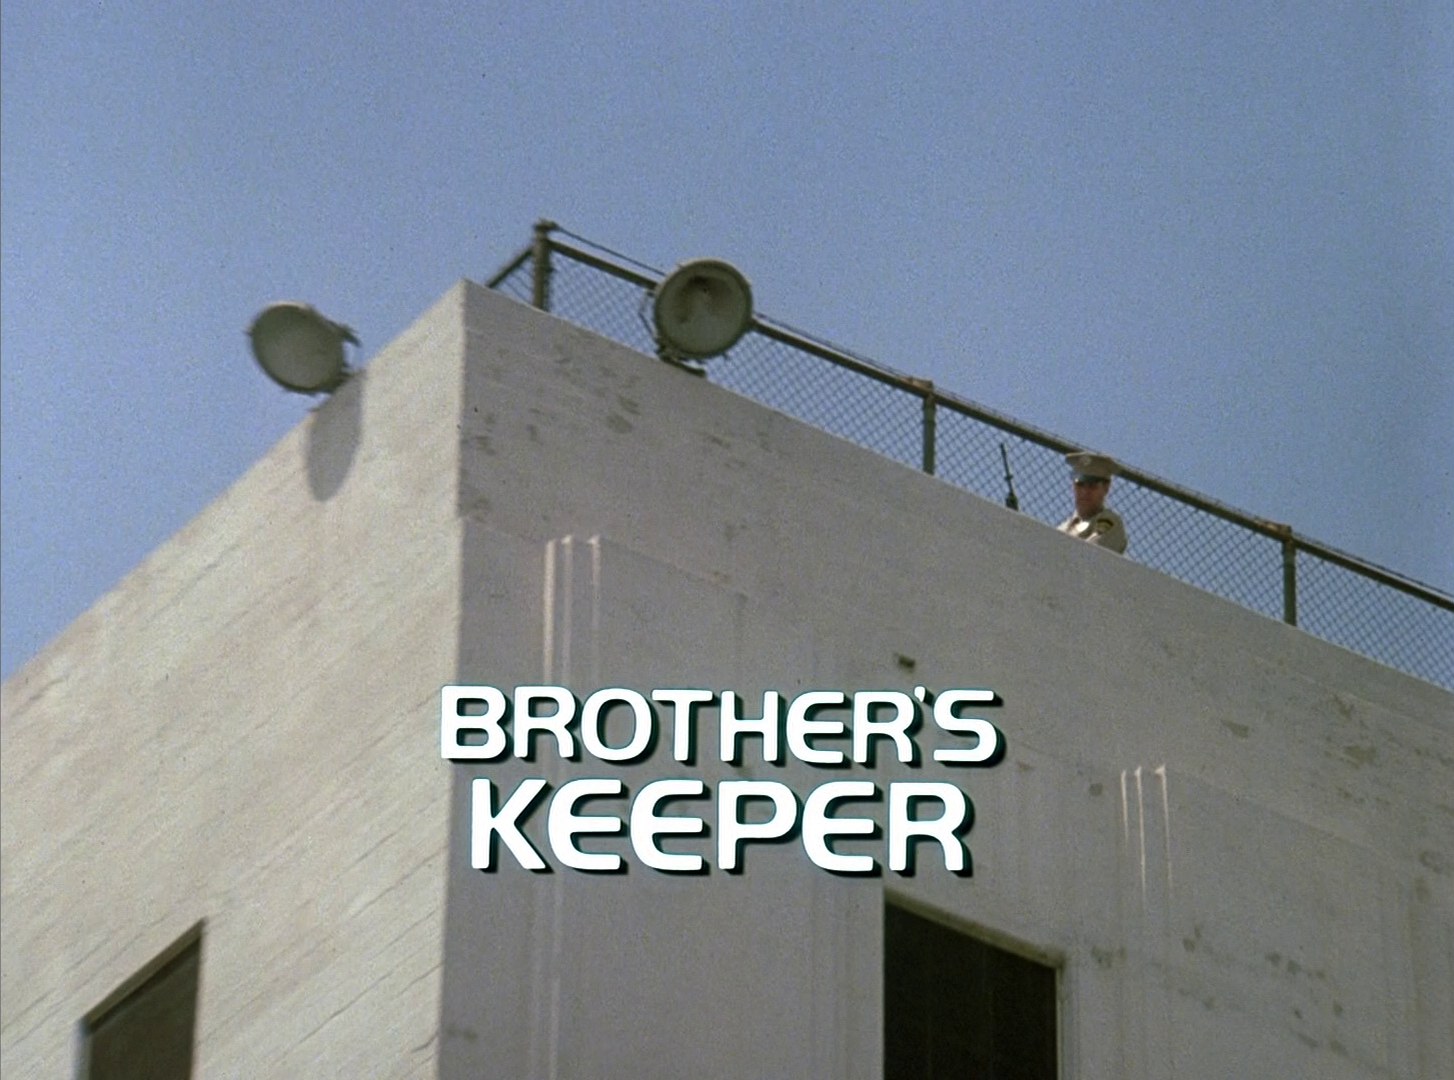 Knight Rider Season 2 - Episode 23 - Brother's Keeper - Photo 1